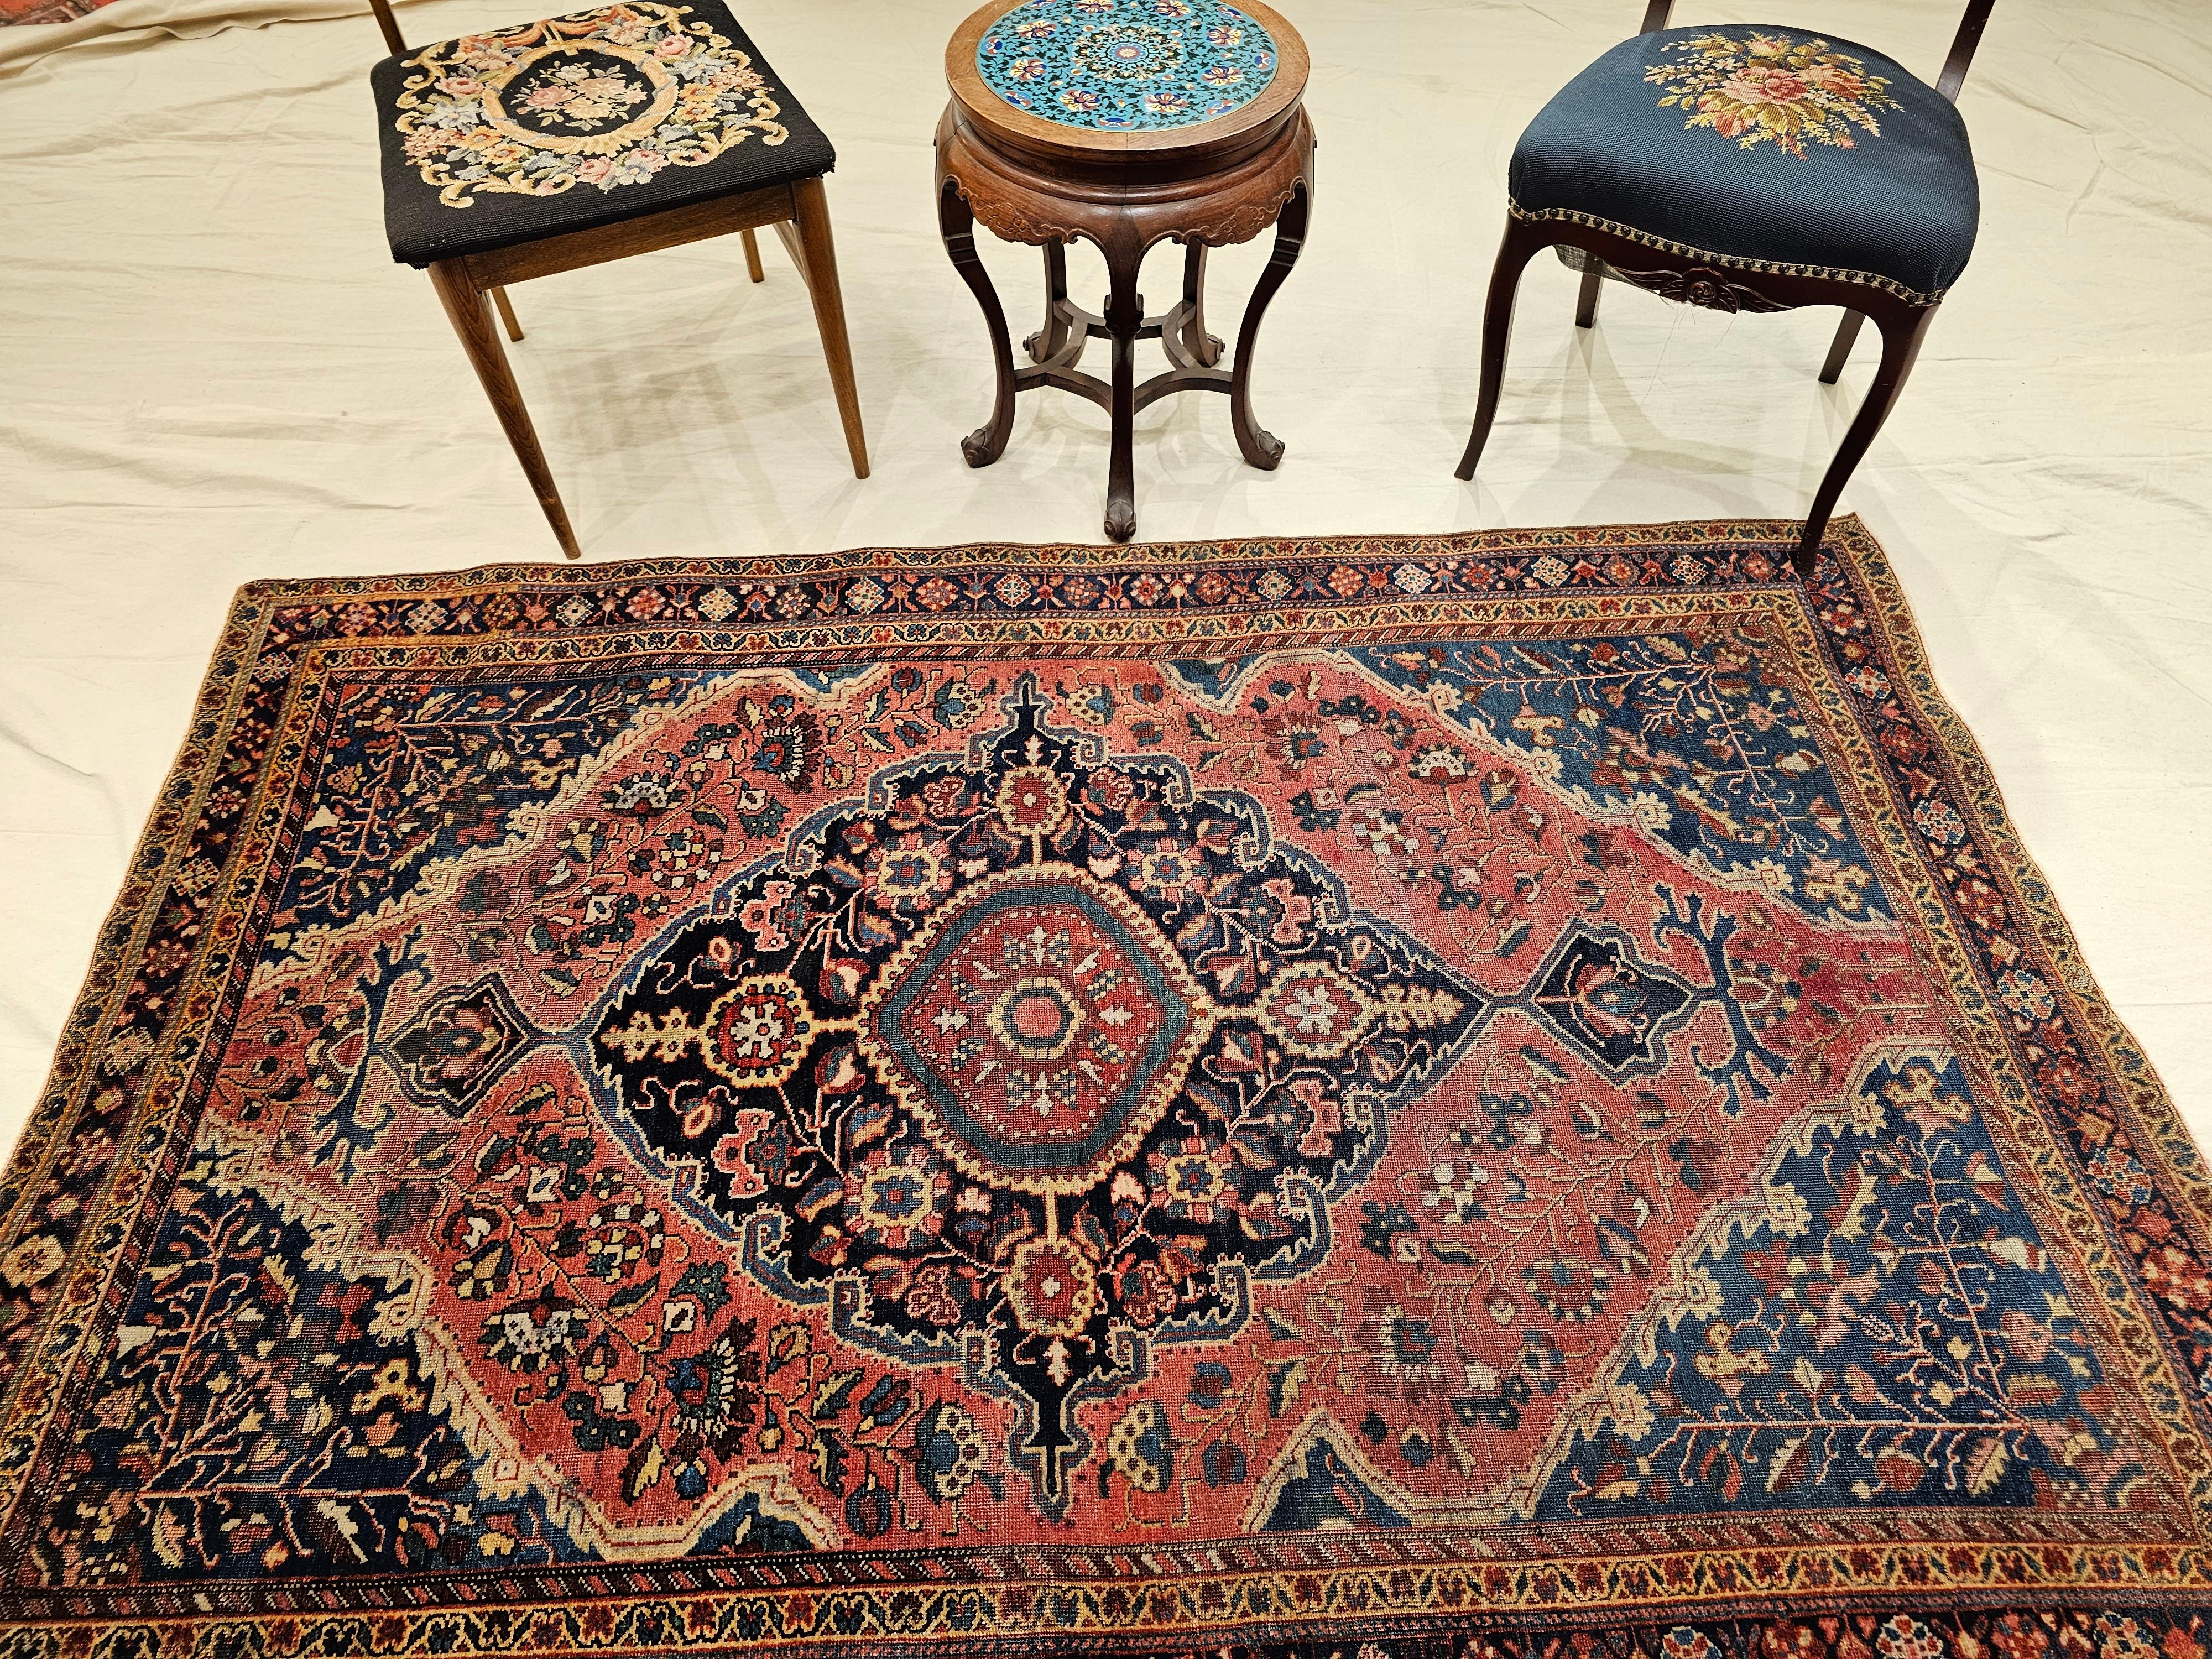 19th Century Persian Farahan Sarouk Area Rug in Rust Red, French Blue, Navy Blue For Sale 4